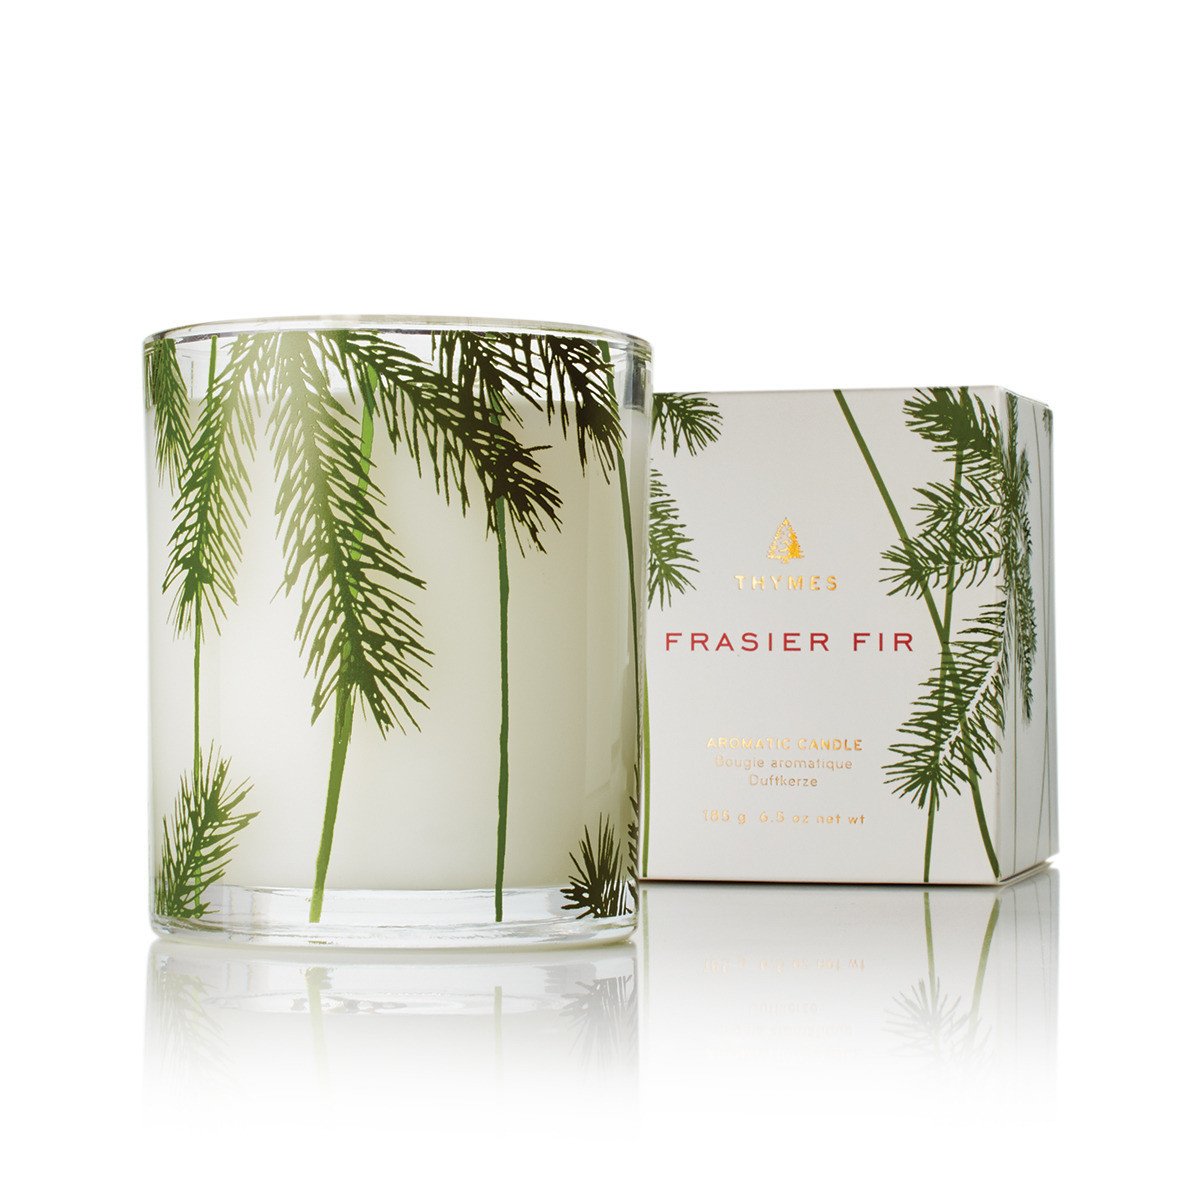 Thymes Aromatic Candle (Green Glass) Frasier Fir 185g/6.5oz, 185g